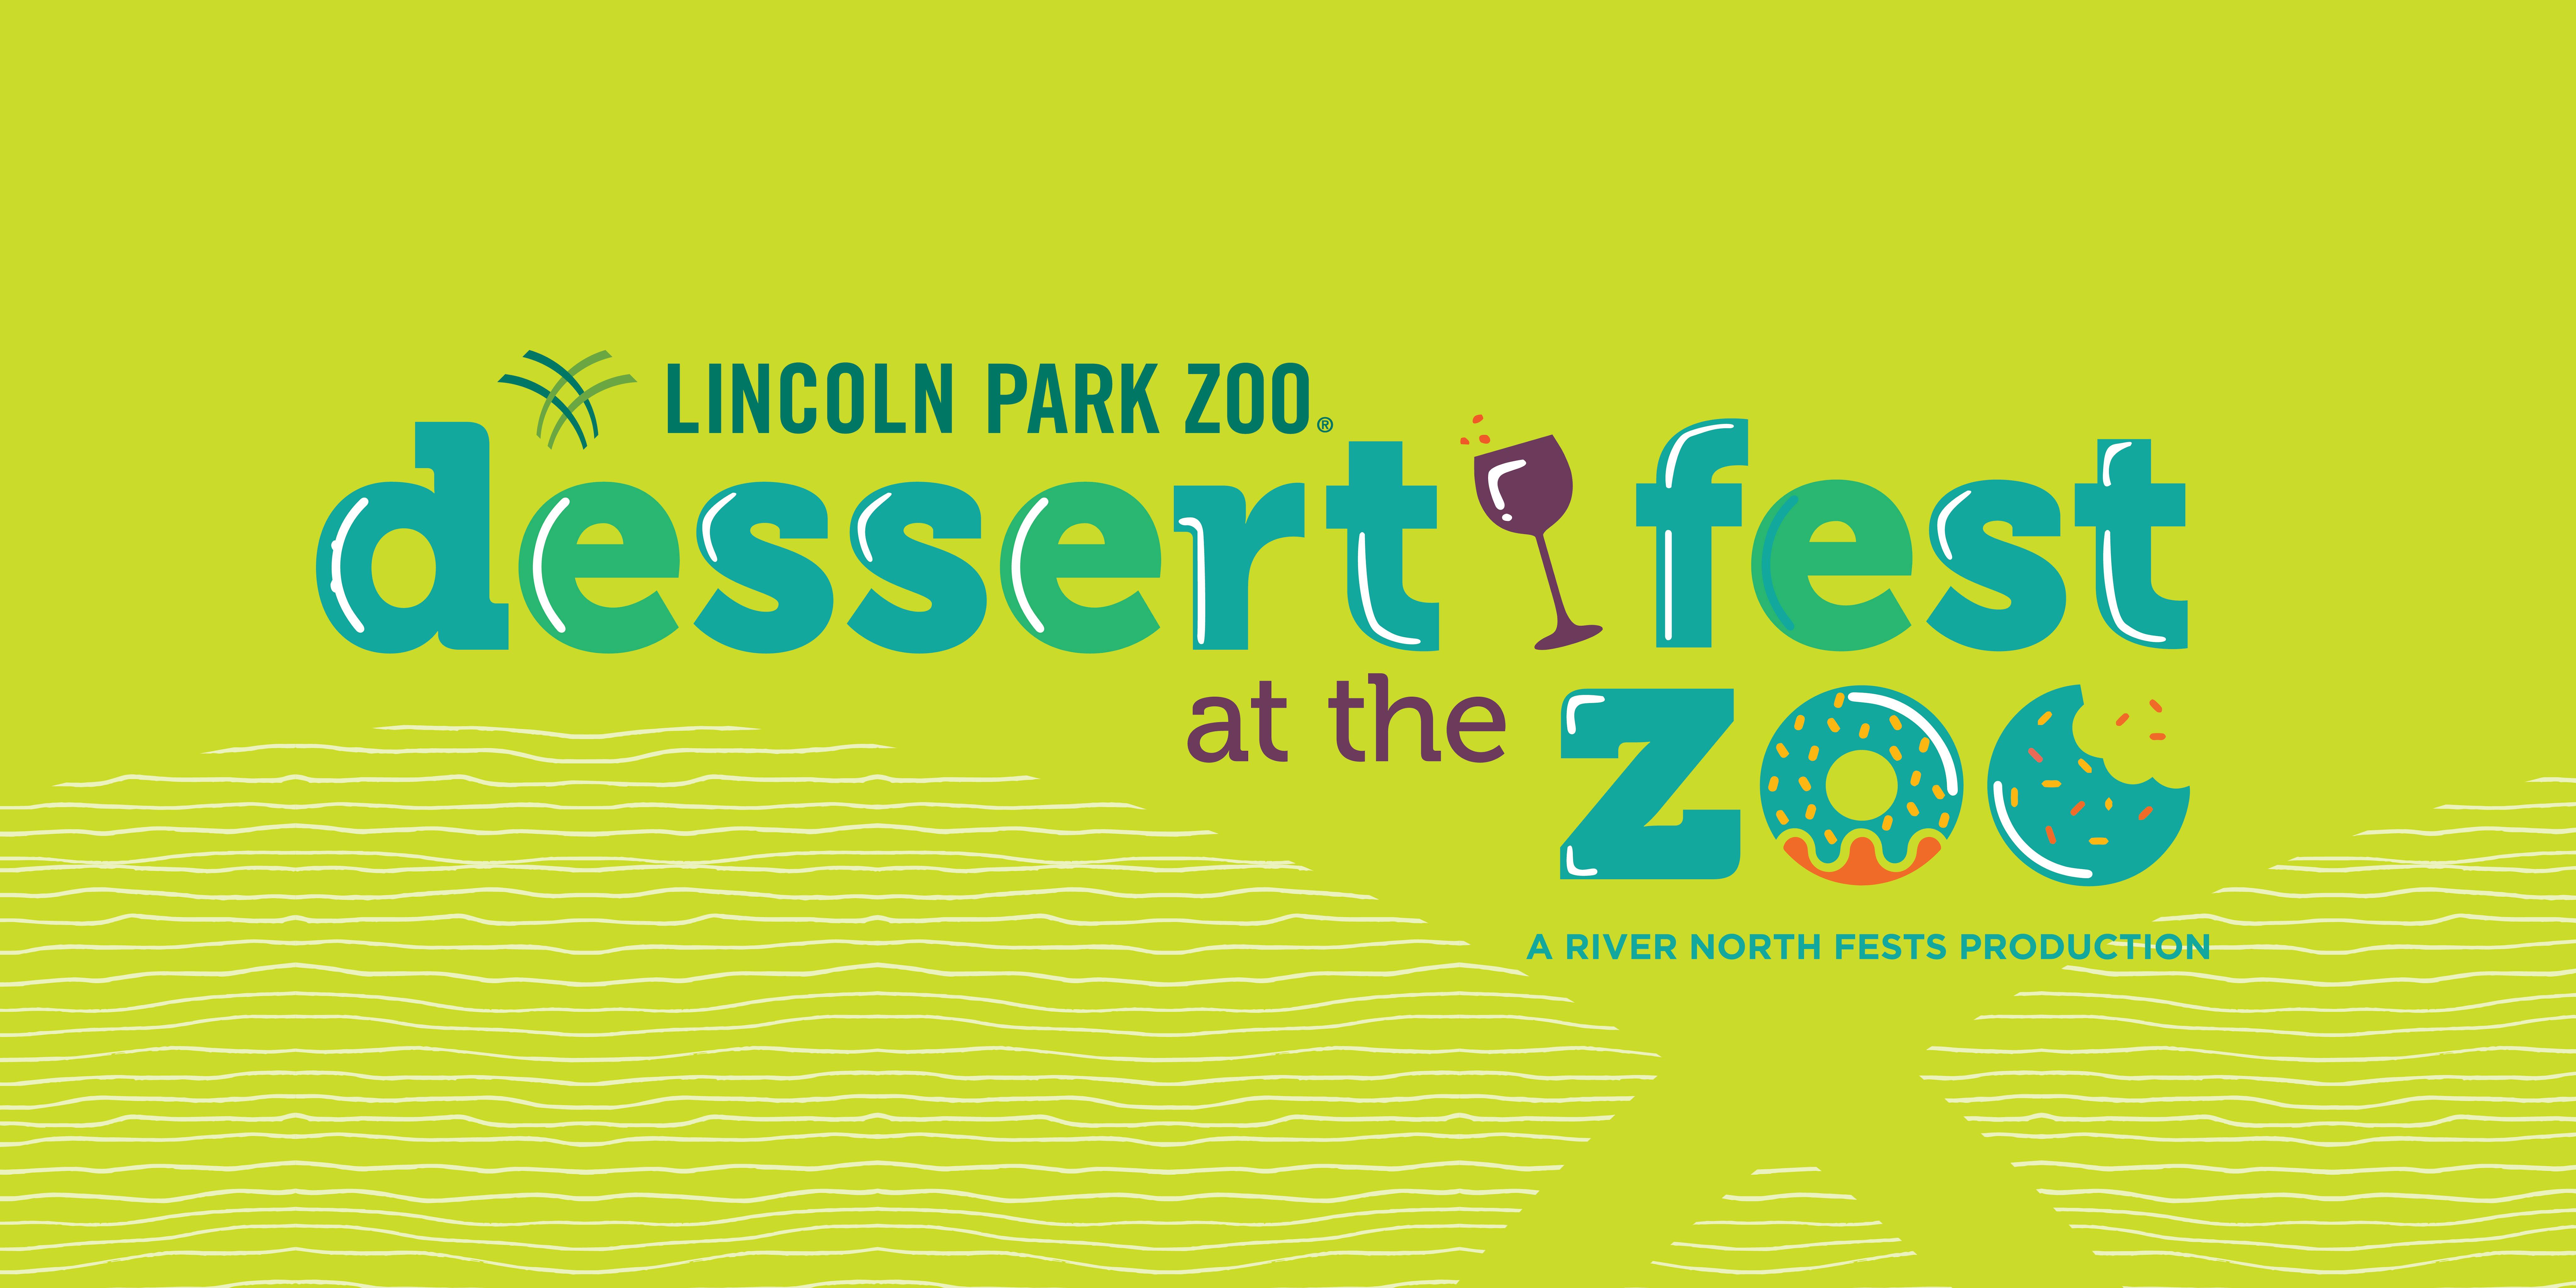 Dessert Fest at the Zoo! - A Chicago Dessert Tasting at Lincoln Park Zoo